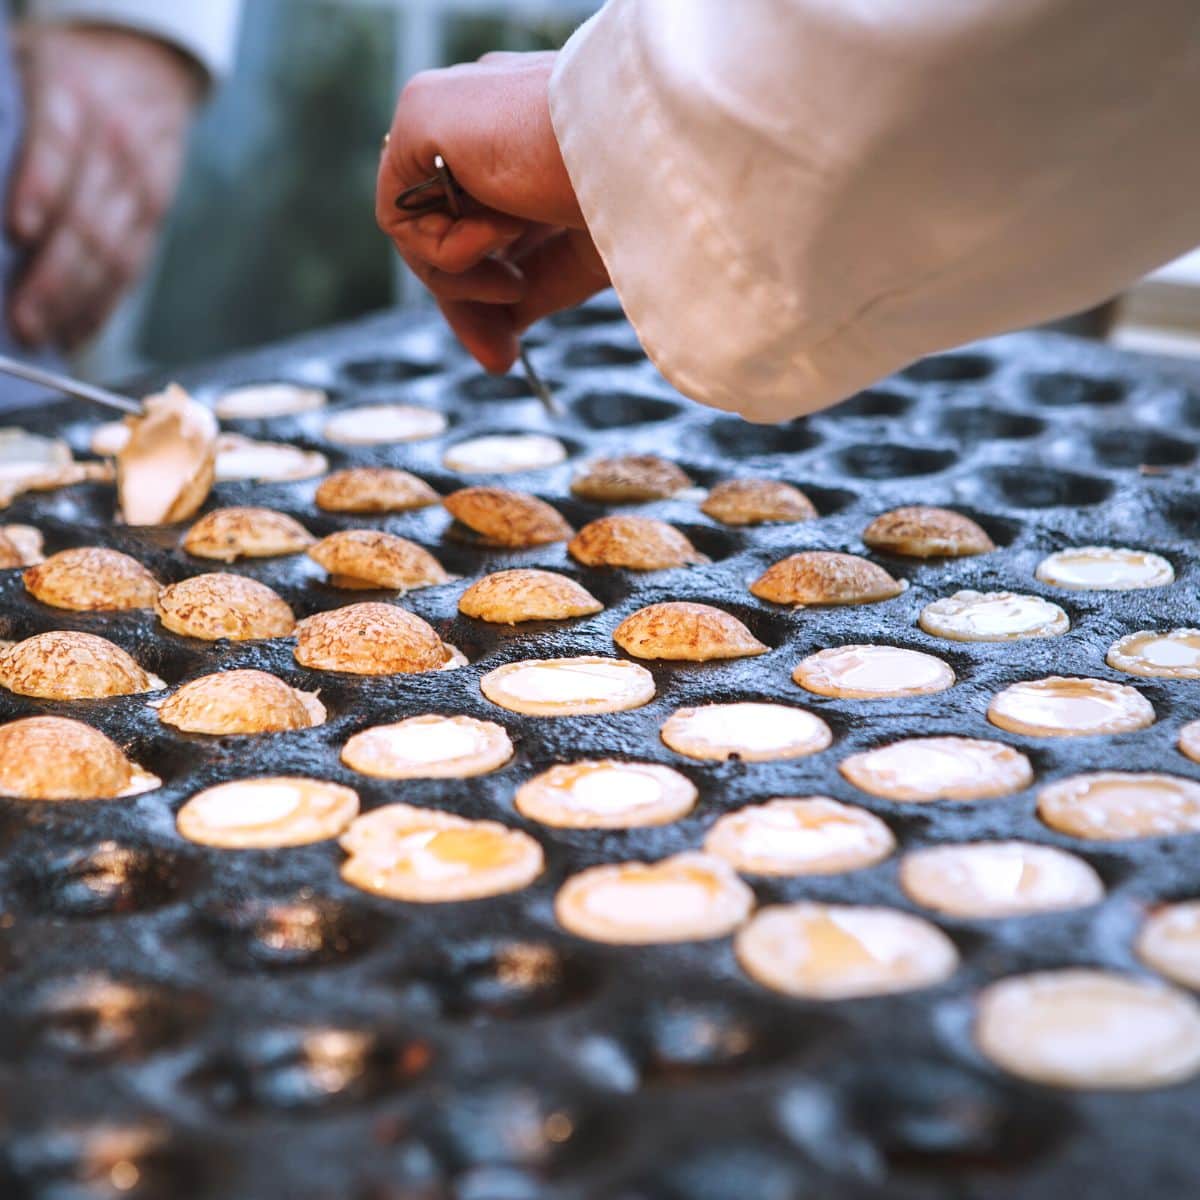 A chef is preparing a tray of vegetarian pastries.